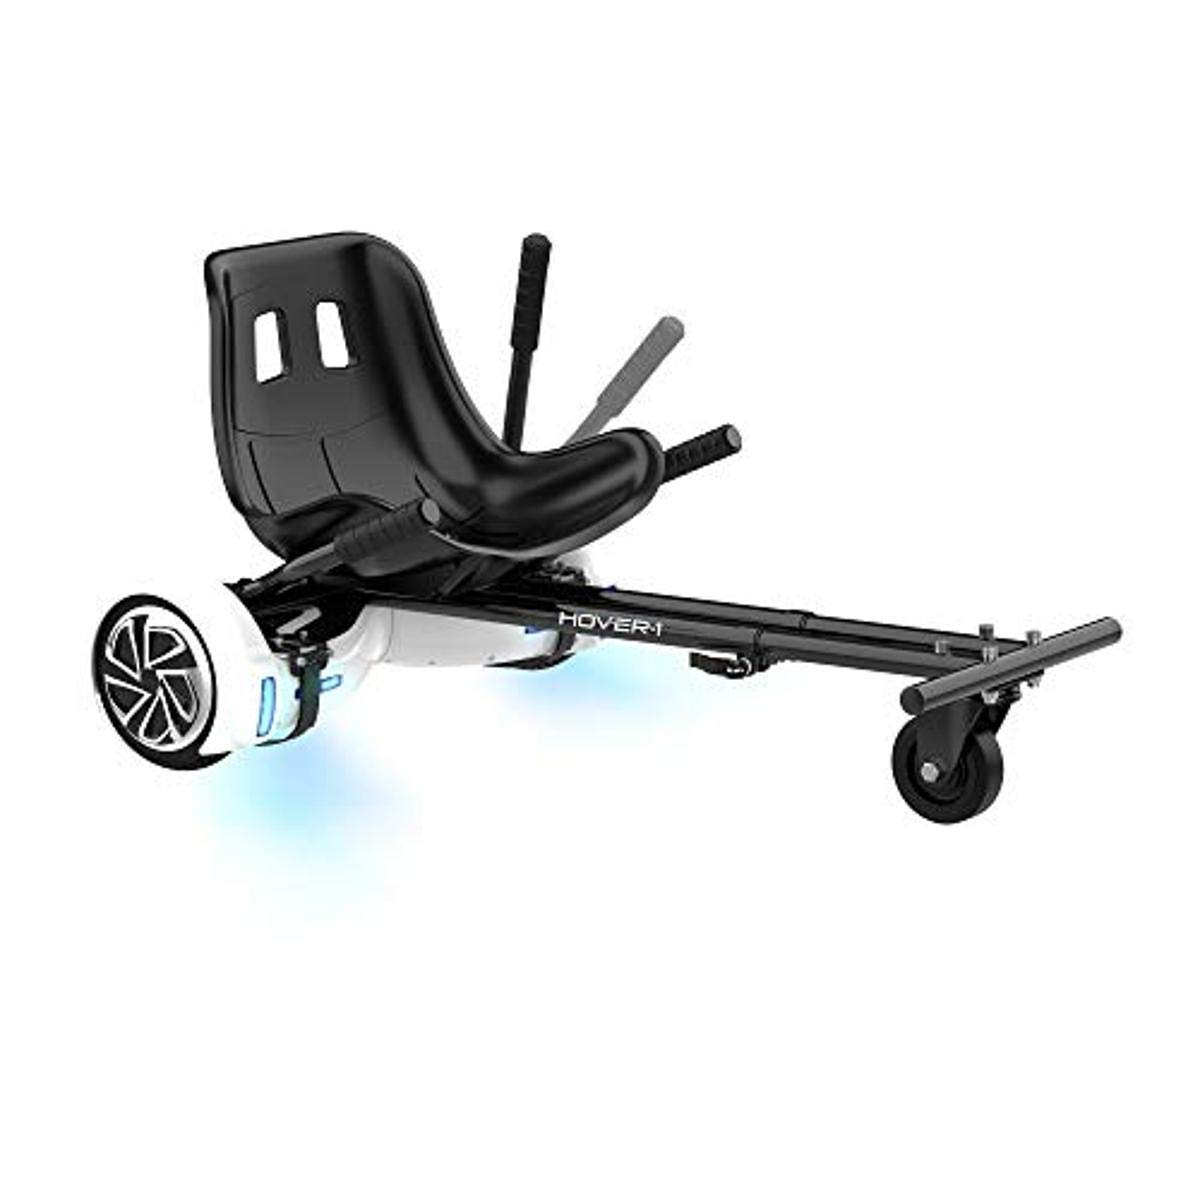 Hover-1 Buggy Attachment | Compatible with All 6.5" & 8" Electric Hoverboards, Hand-Operated Rear Wheel Control, Adjustable Frame & Straps, Easy Assembly & Install